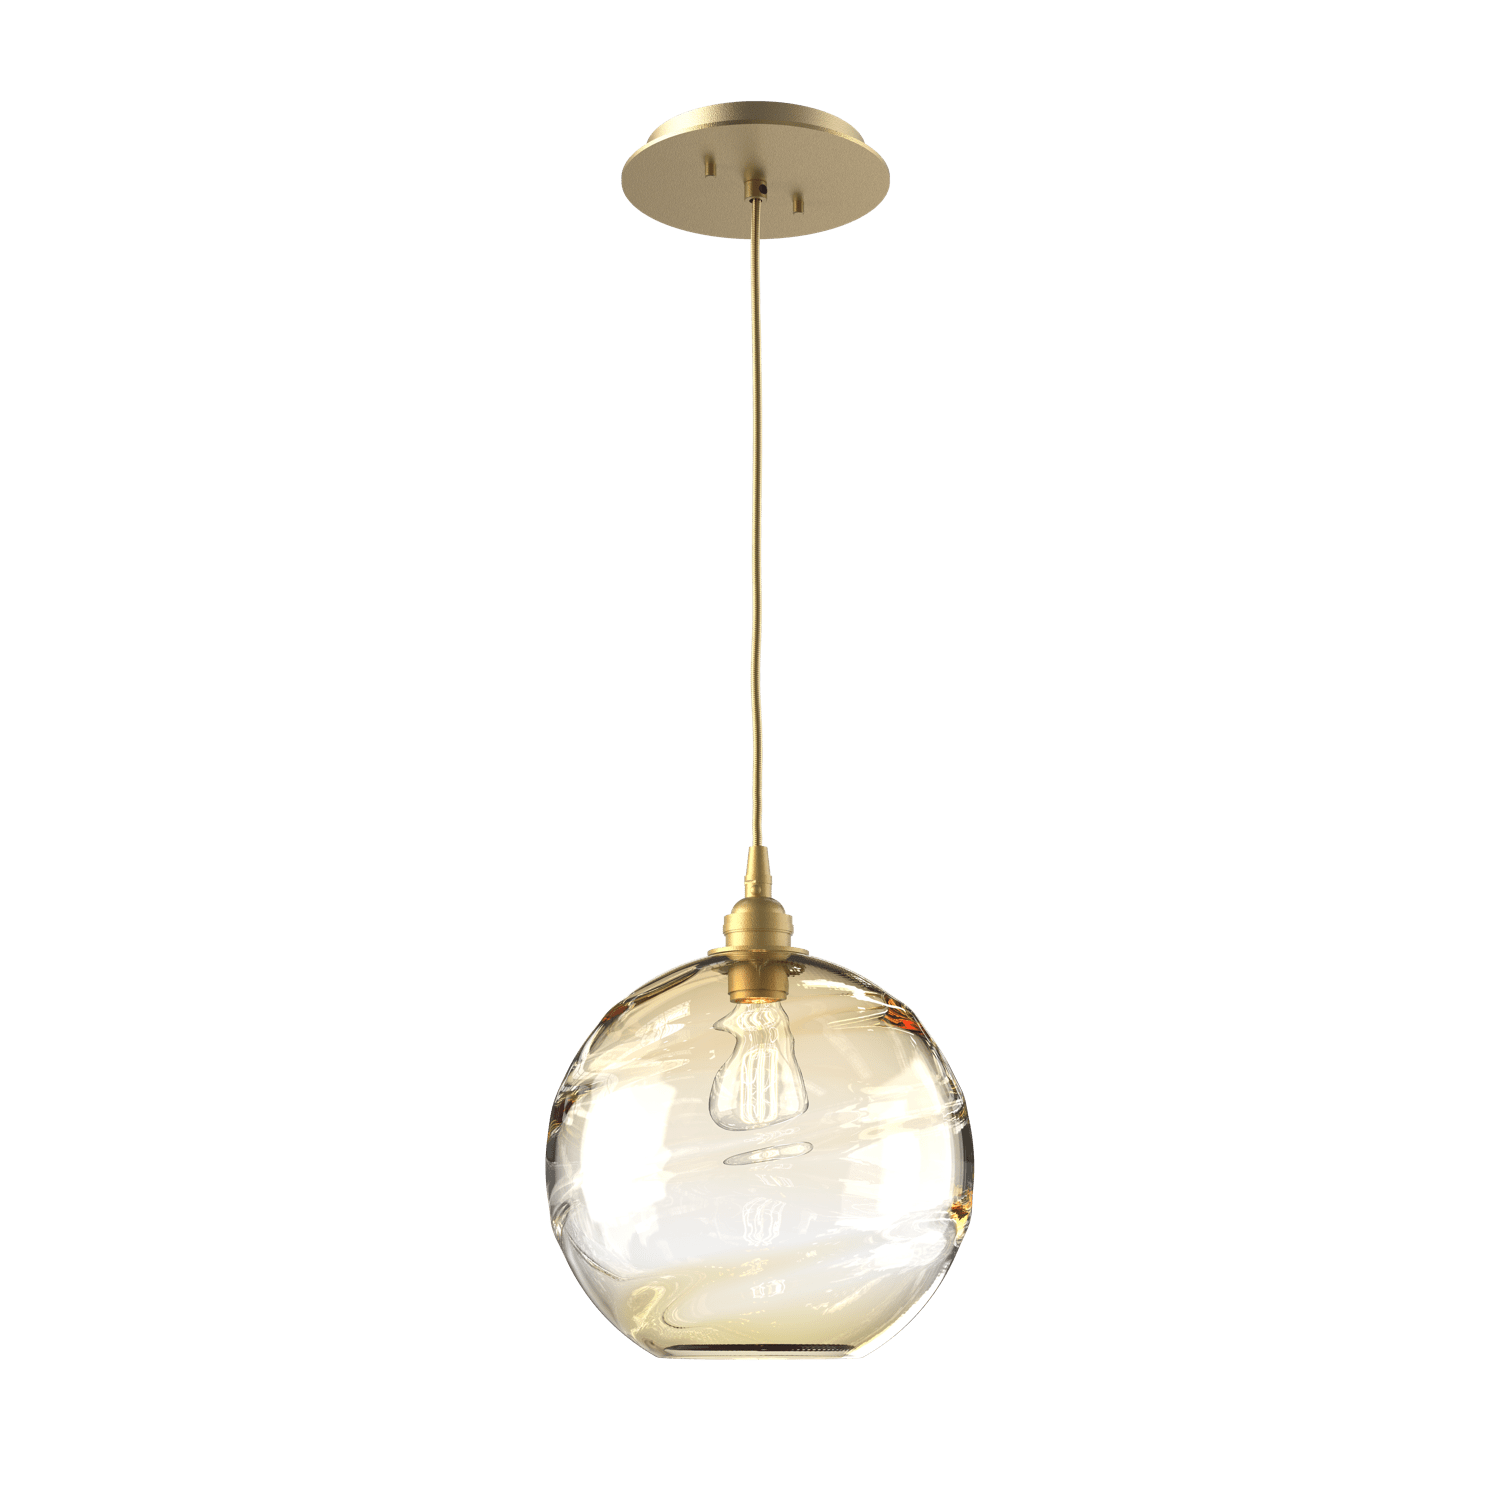 LAB0047-01-GB-OA-Hammerton-Studio-Optic-Blown-Glass-Terra-pendant-light-with-gilded-brass-finish-and-optic-amber-blown-glass-shades-and-incandescent-lamping